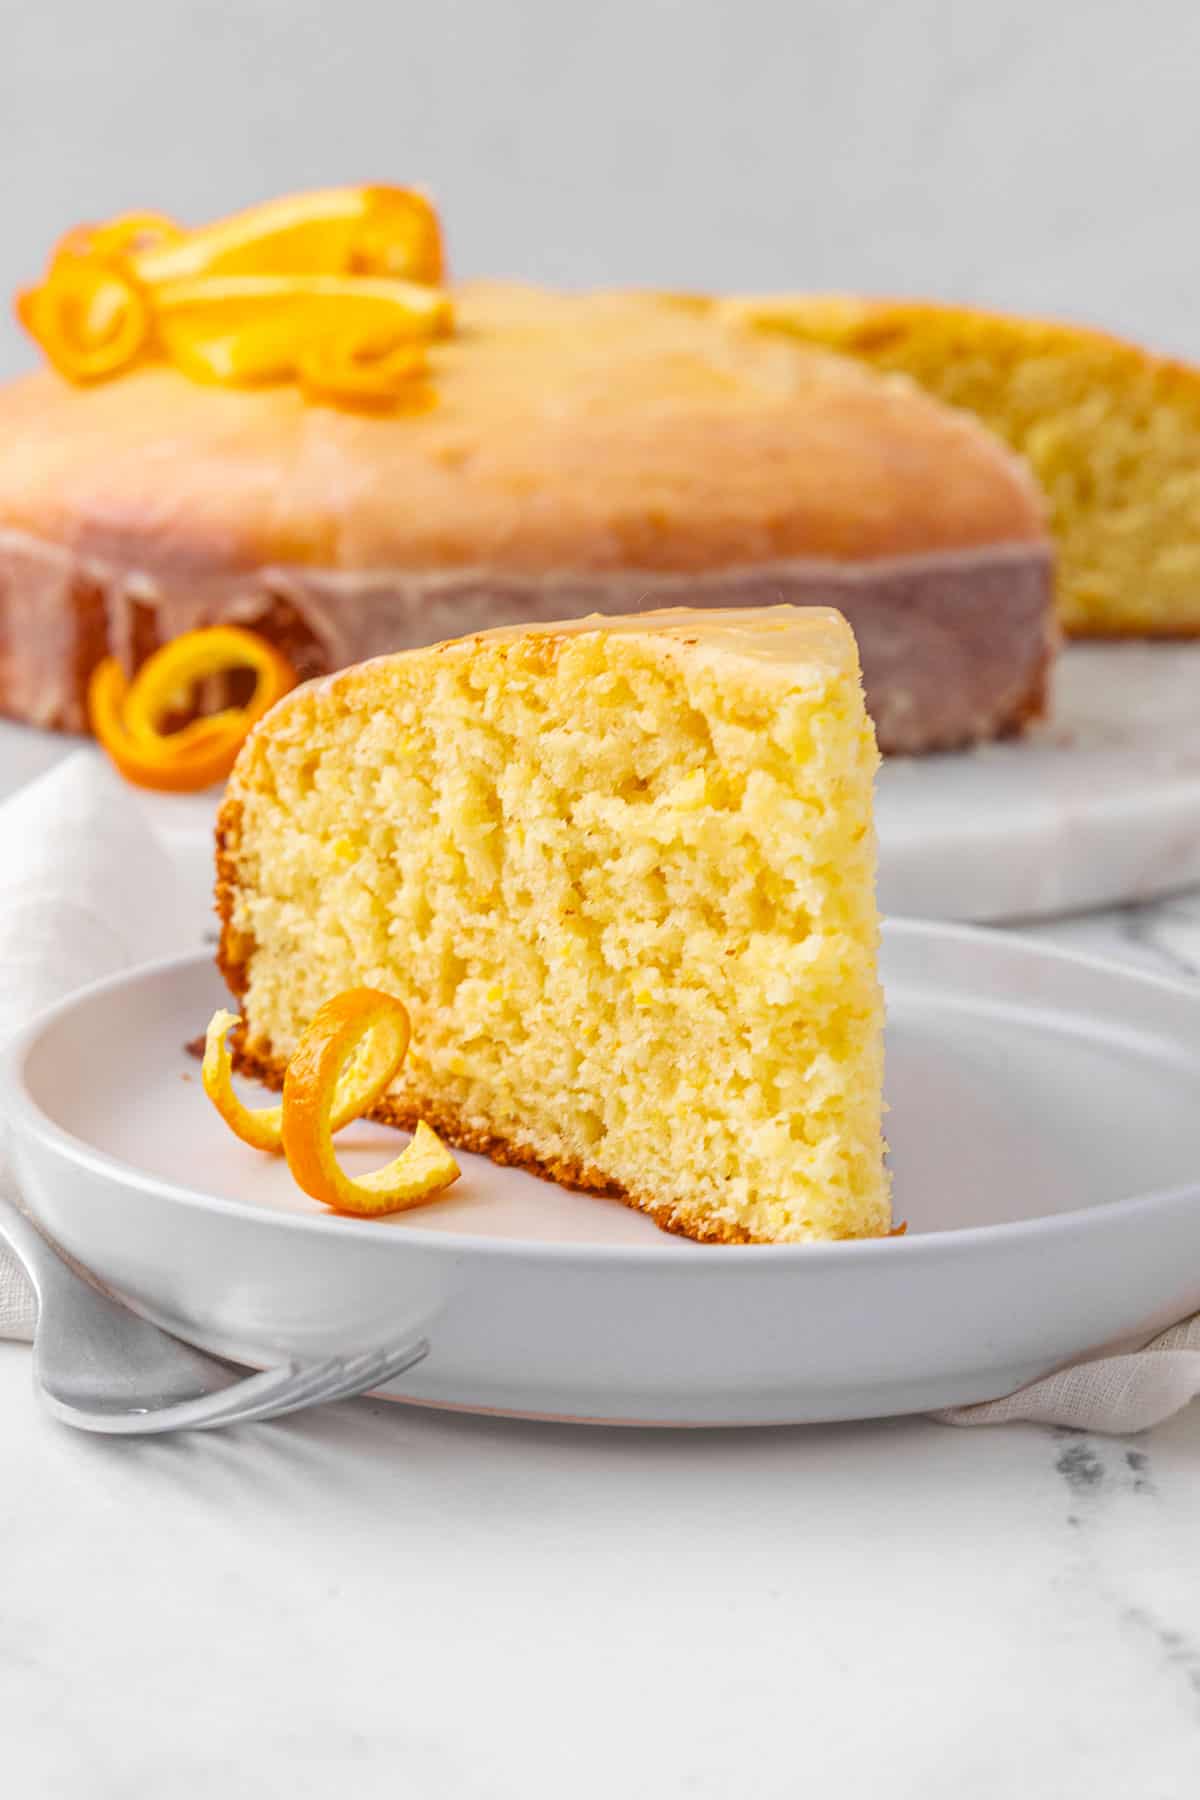 Closeup of a slice of orange cake on a white small plate with a fork and the whole cake in the background.